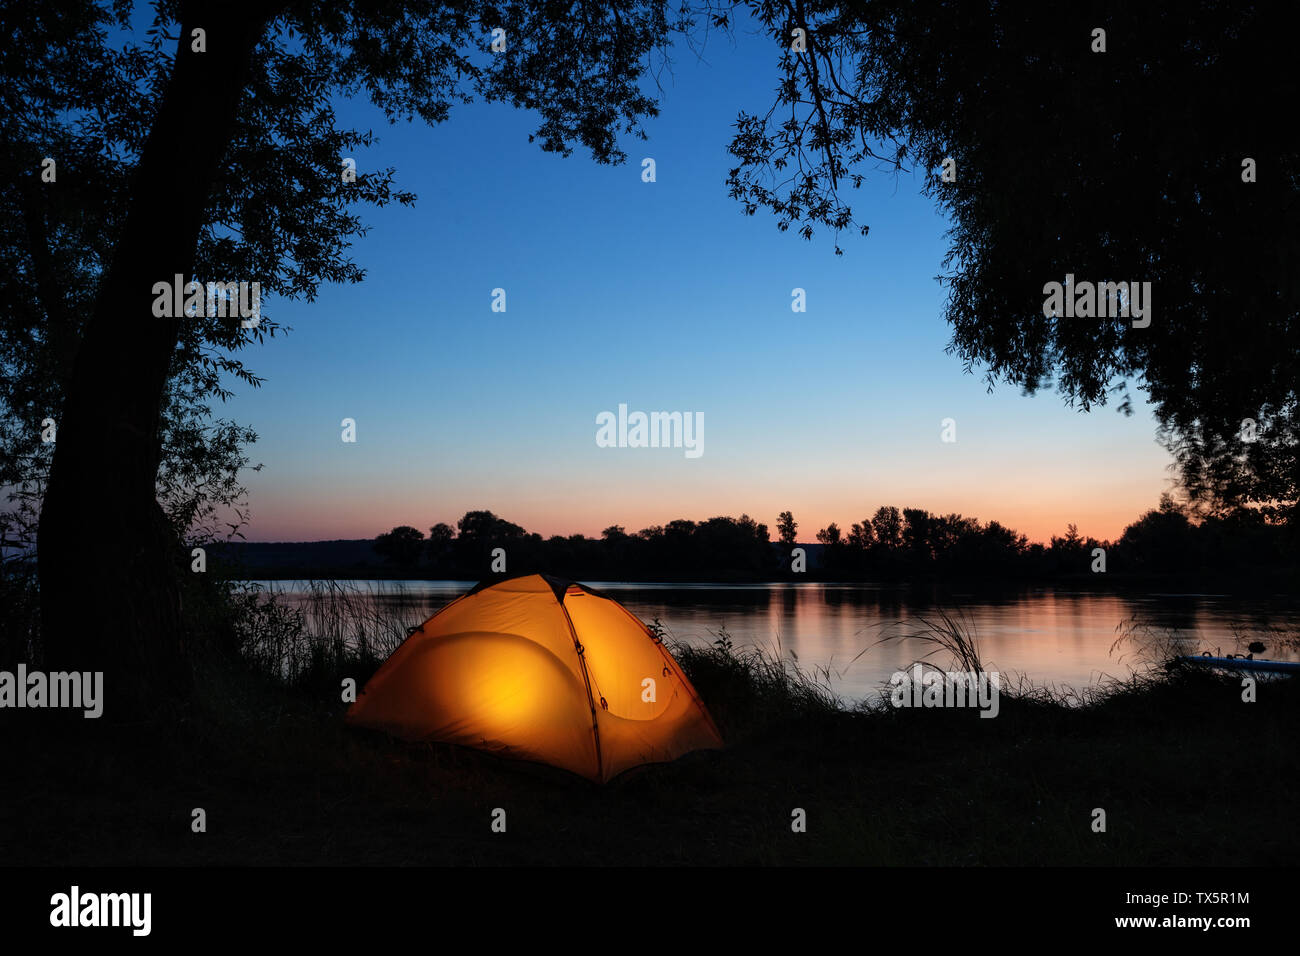 Illuminated from inside orange tent on the shore of lake among silhouettes of trees Stock Photo